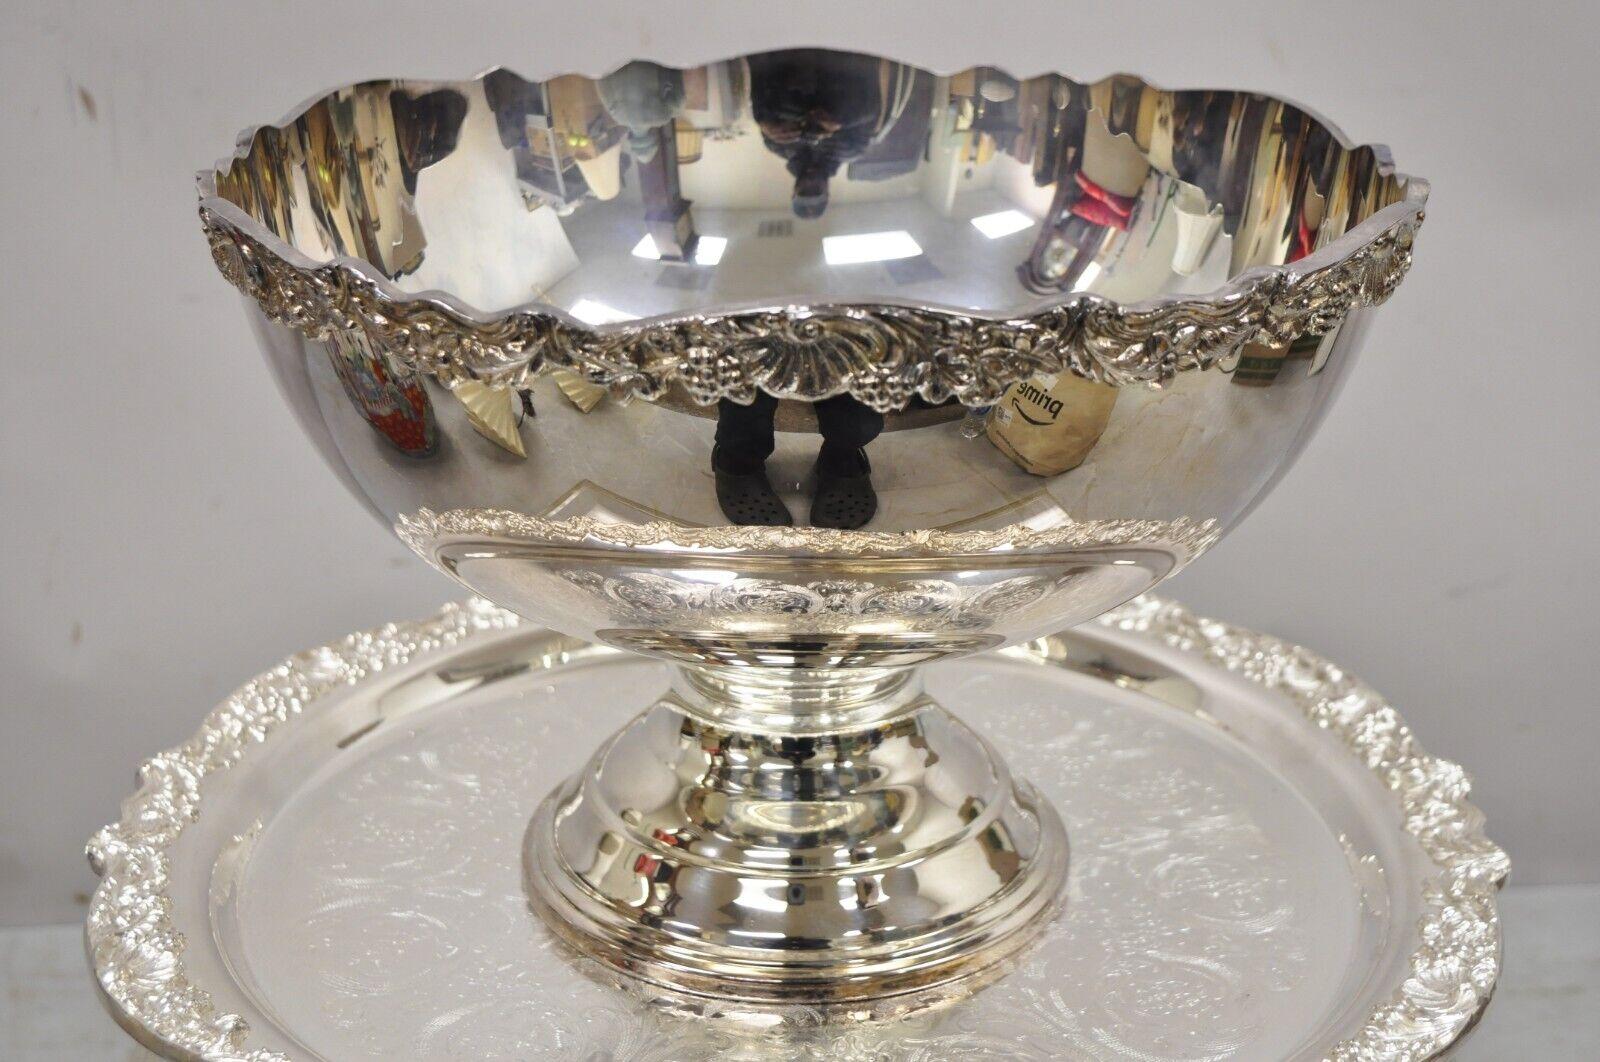 Vintage towle silver plated victorian style punch bowl set - 20 cups tray and punch bowl. Item features (20) cups, large punch bowl, ornate round platter, wonderful detail, spoon/ladle included, very nice vintage set. Circa early to mid-20th